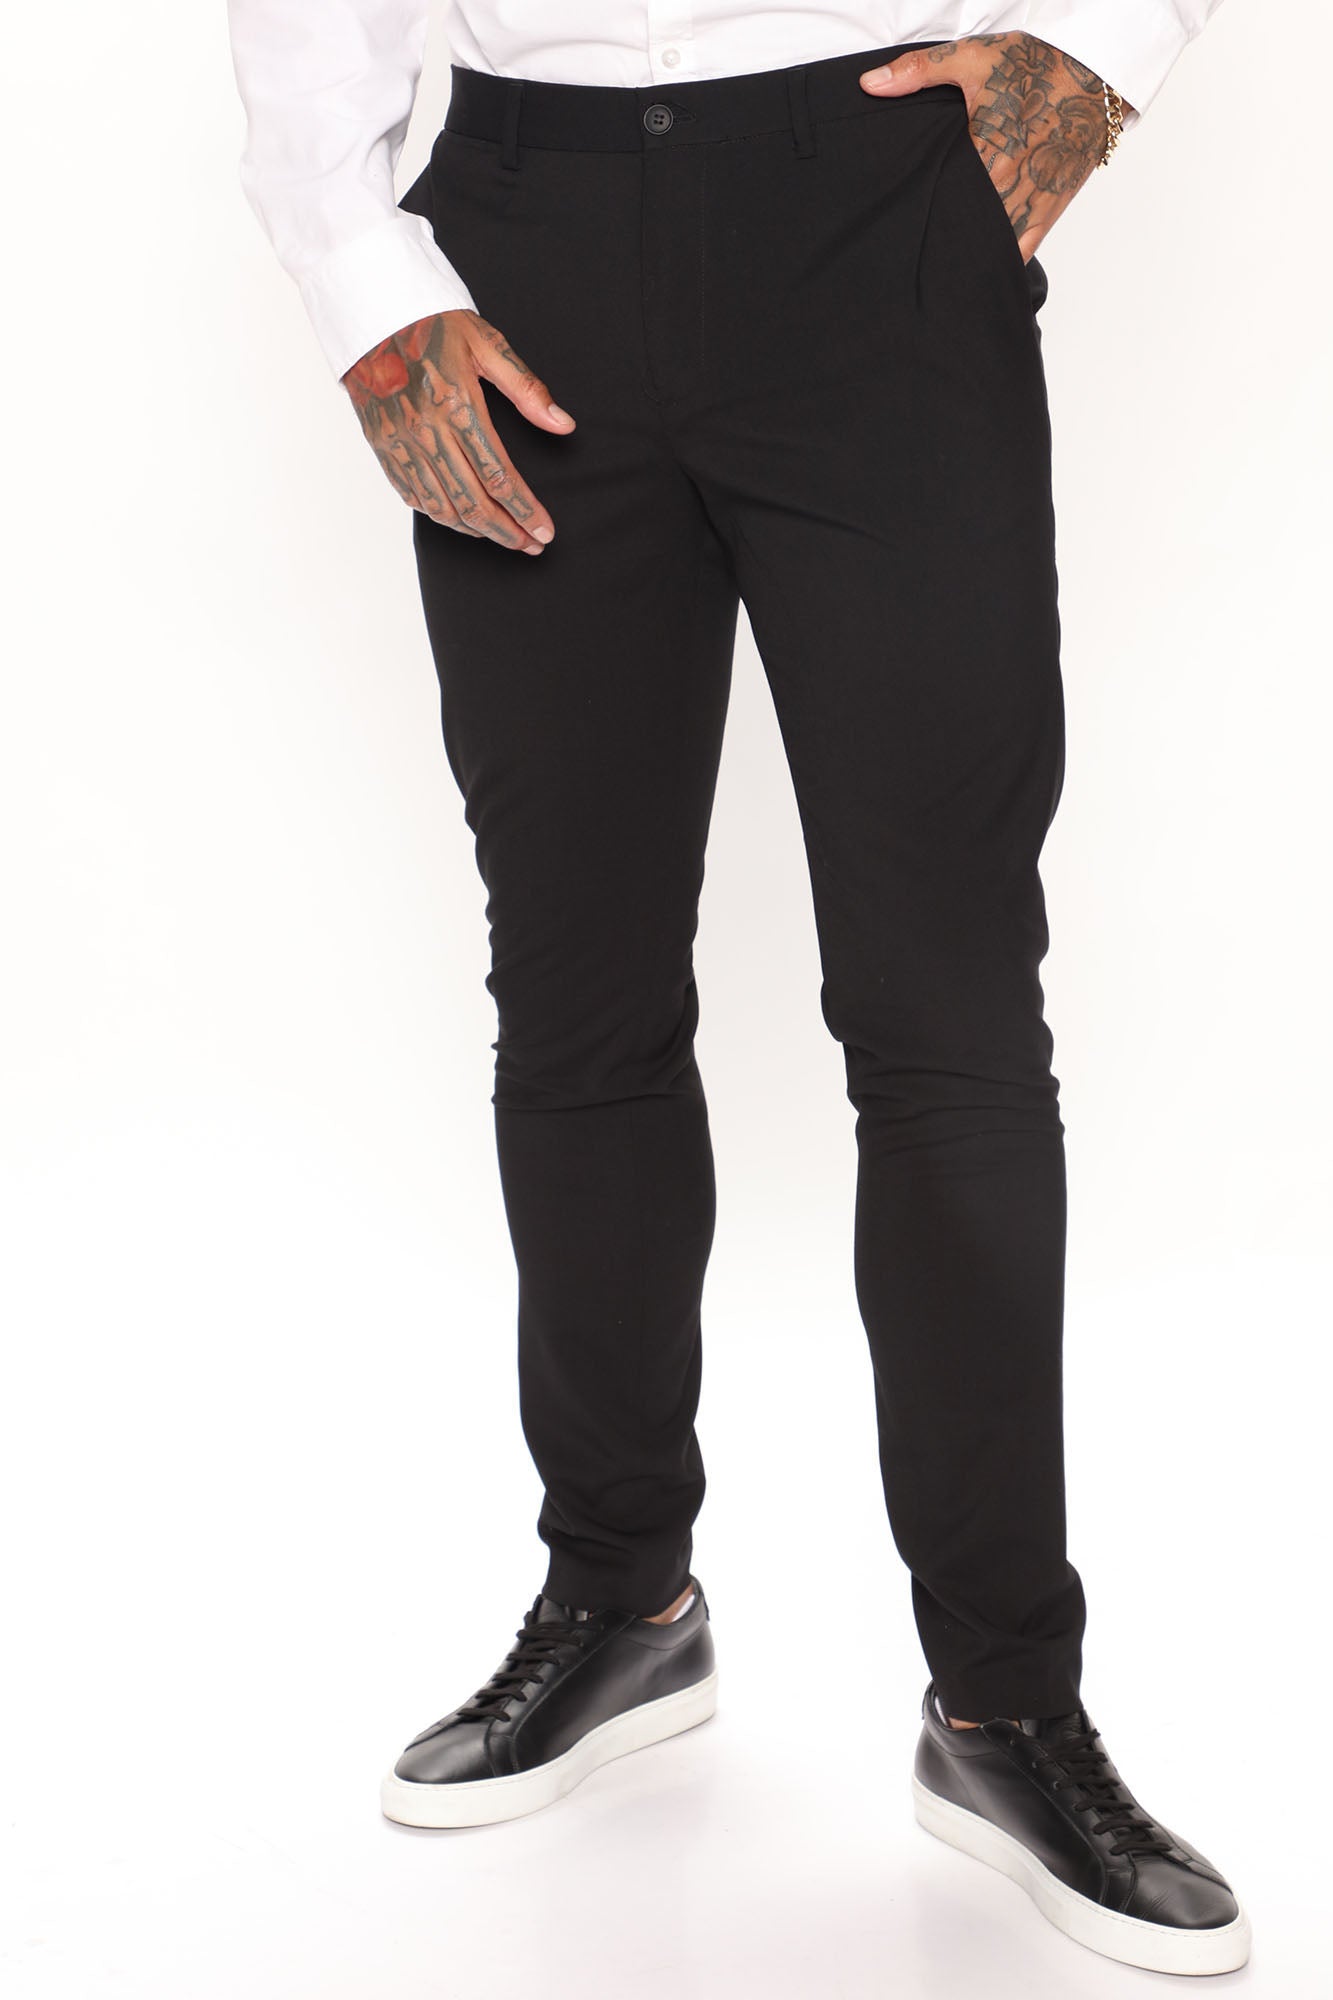 Tall Black Zip Pocket Extra Long Skinny Stretch Trousers | New Look